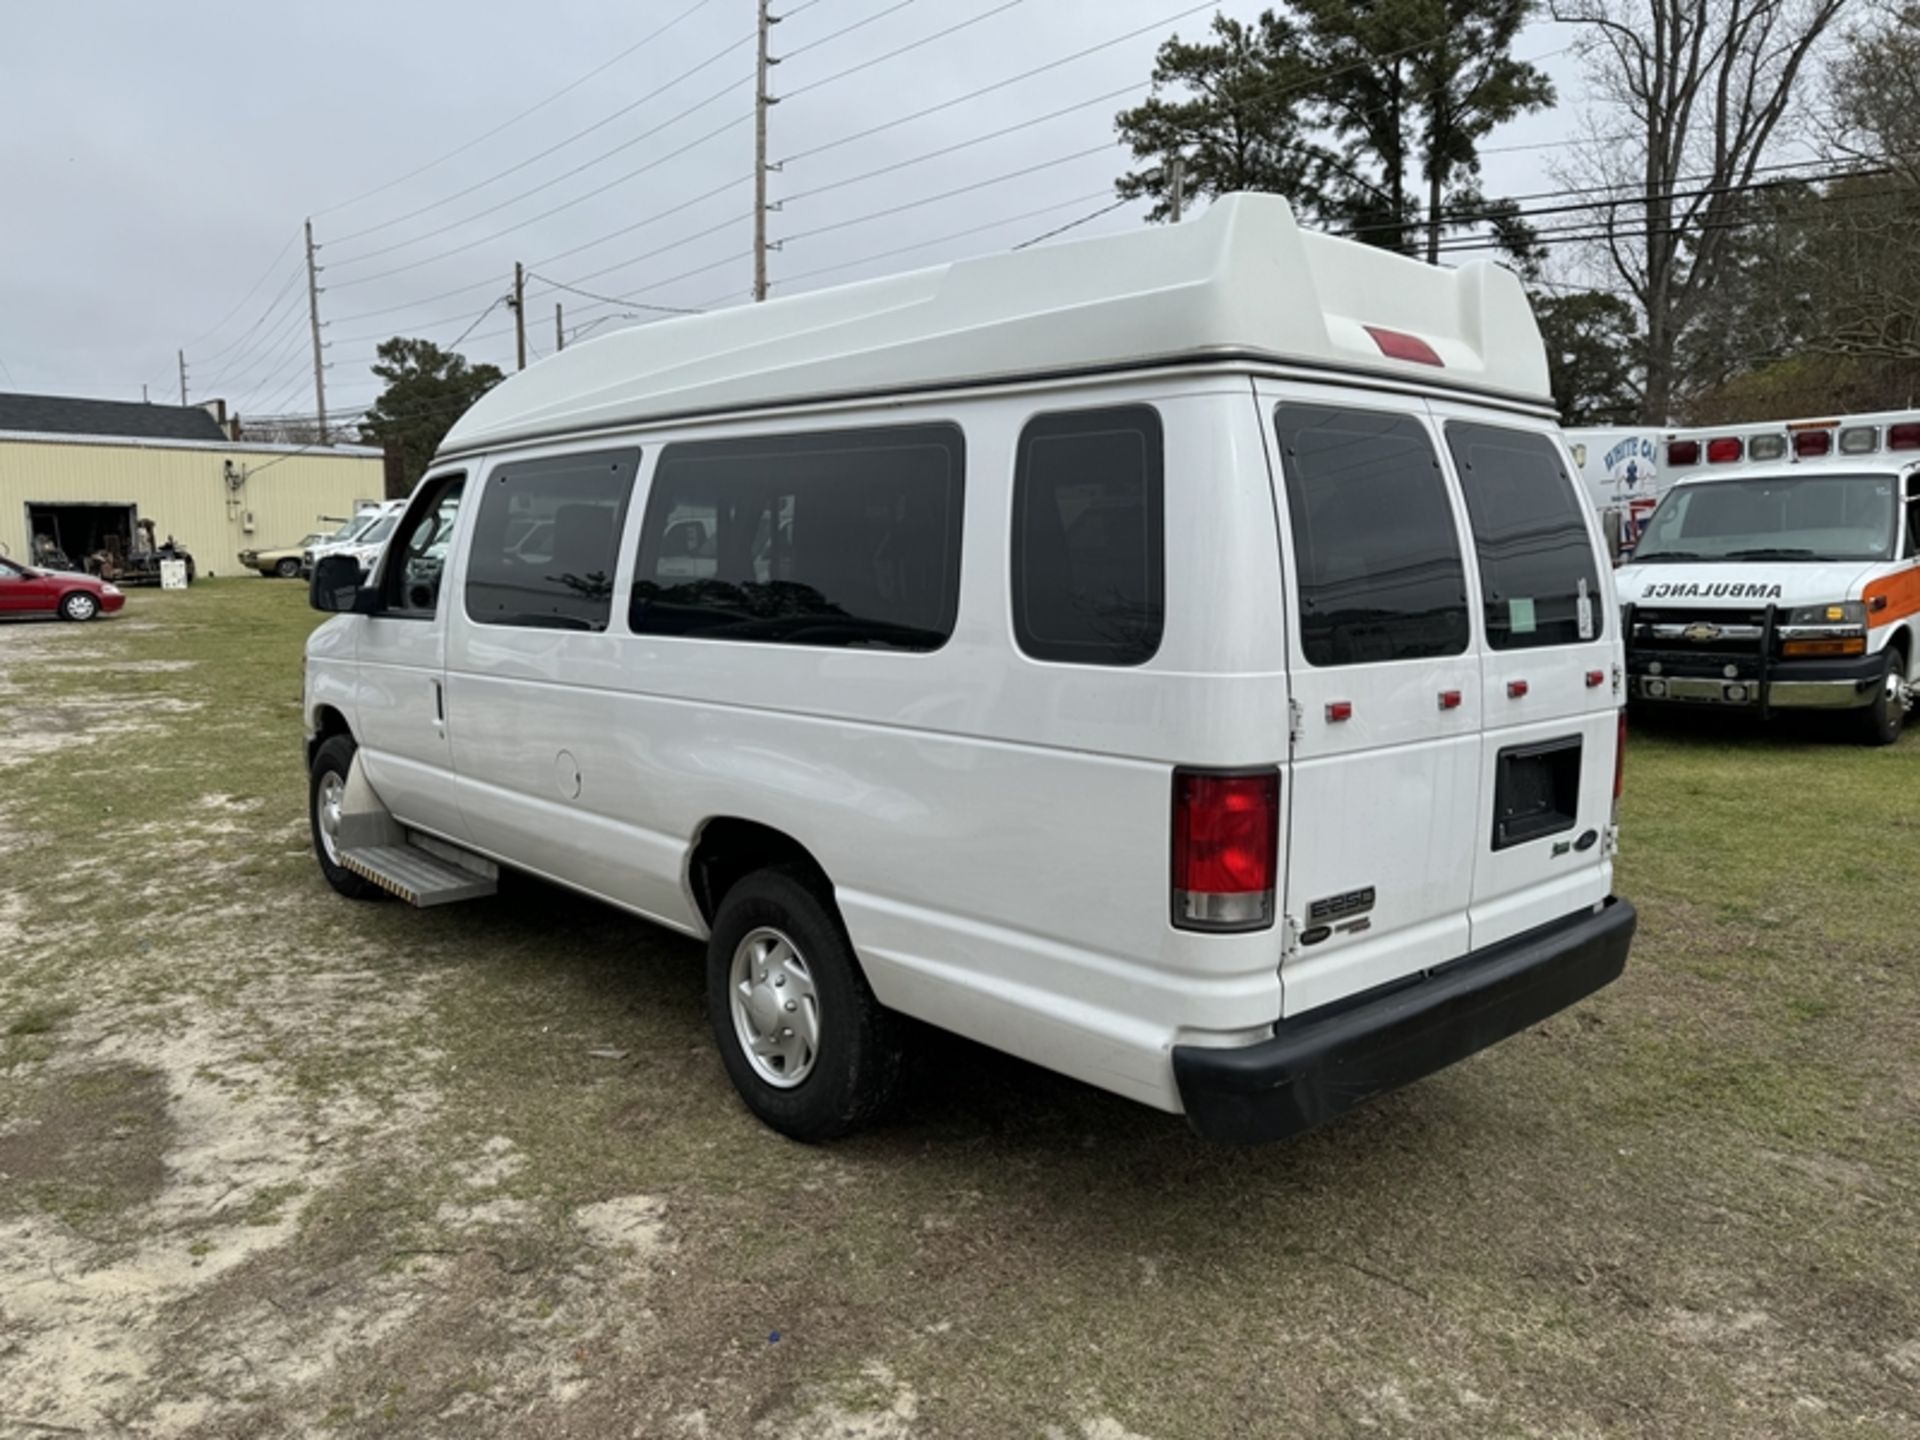 2013 FORD E-250 wheelchair van - 93,207 miles showing - 1FTNS2EW0DDB04057 - Image 3 of 6